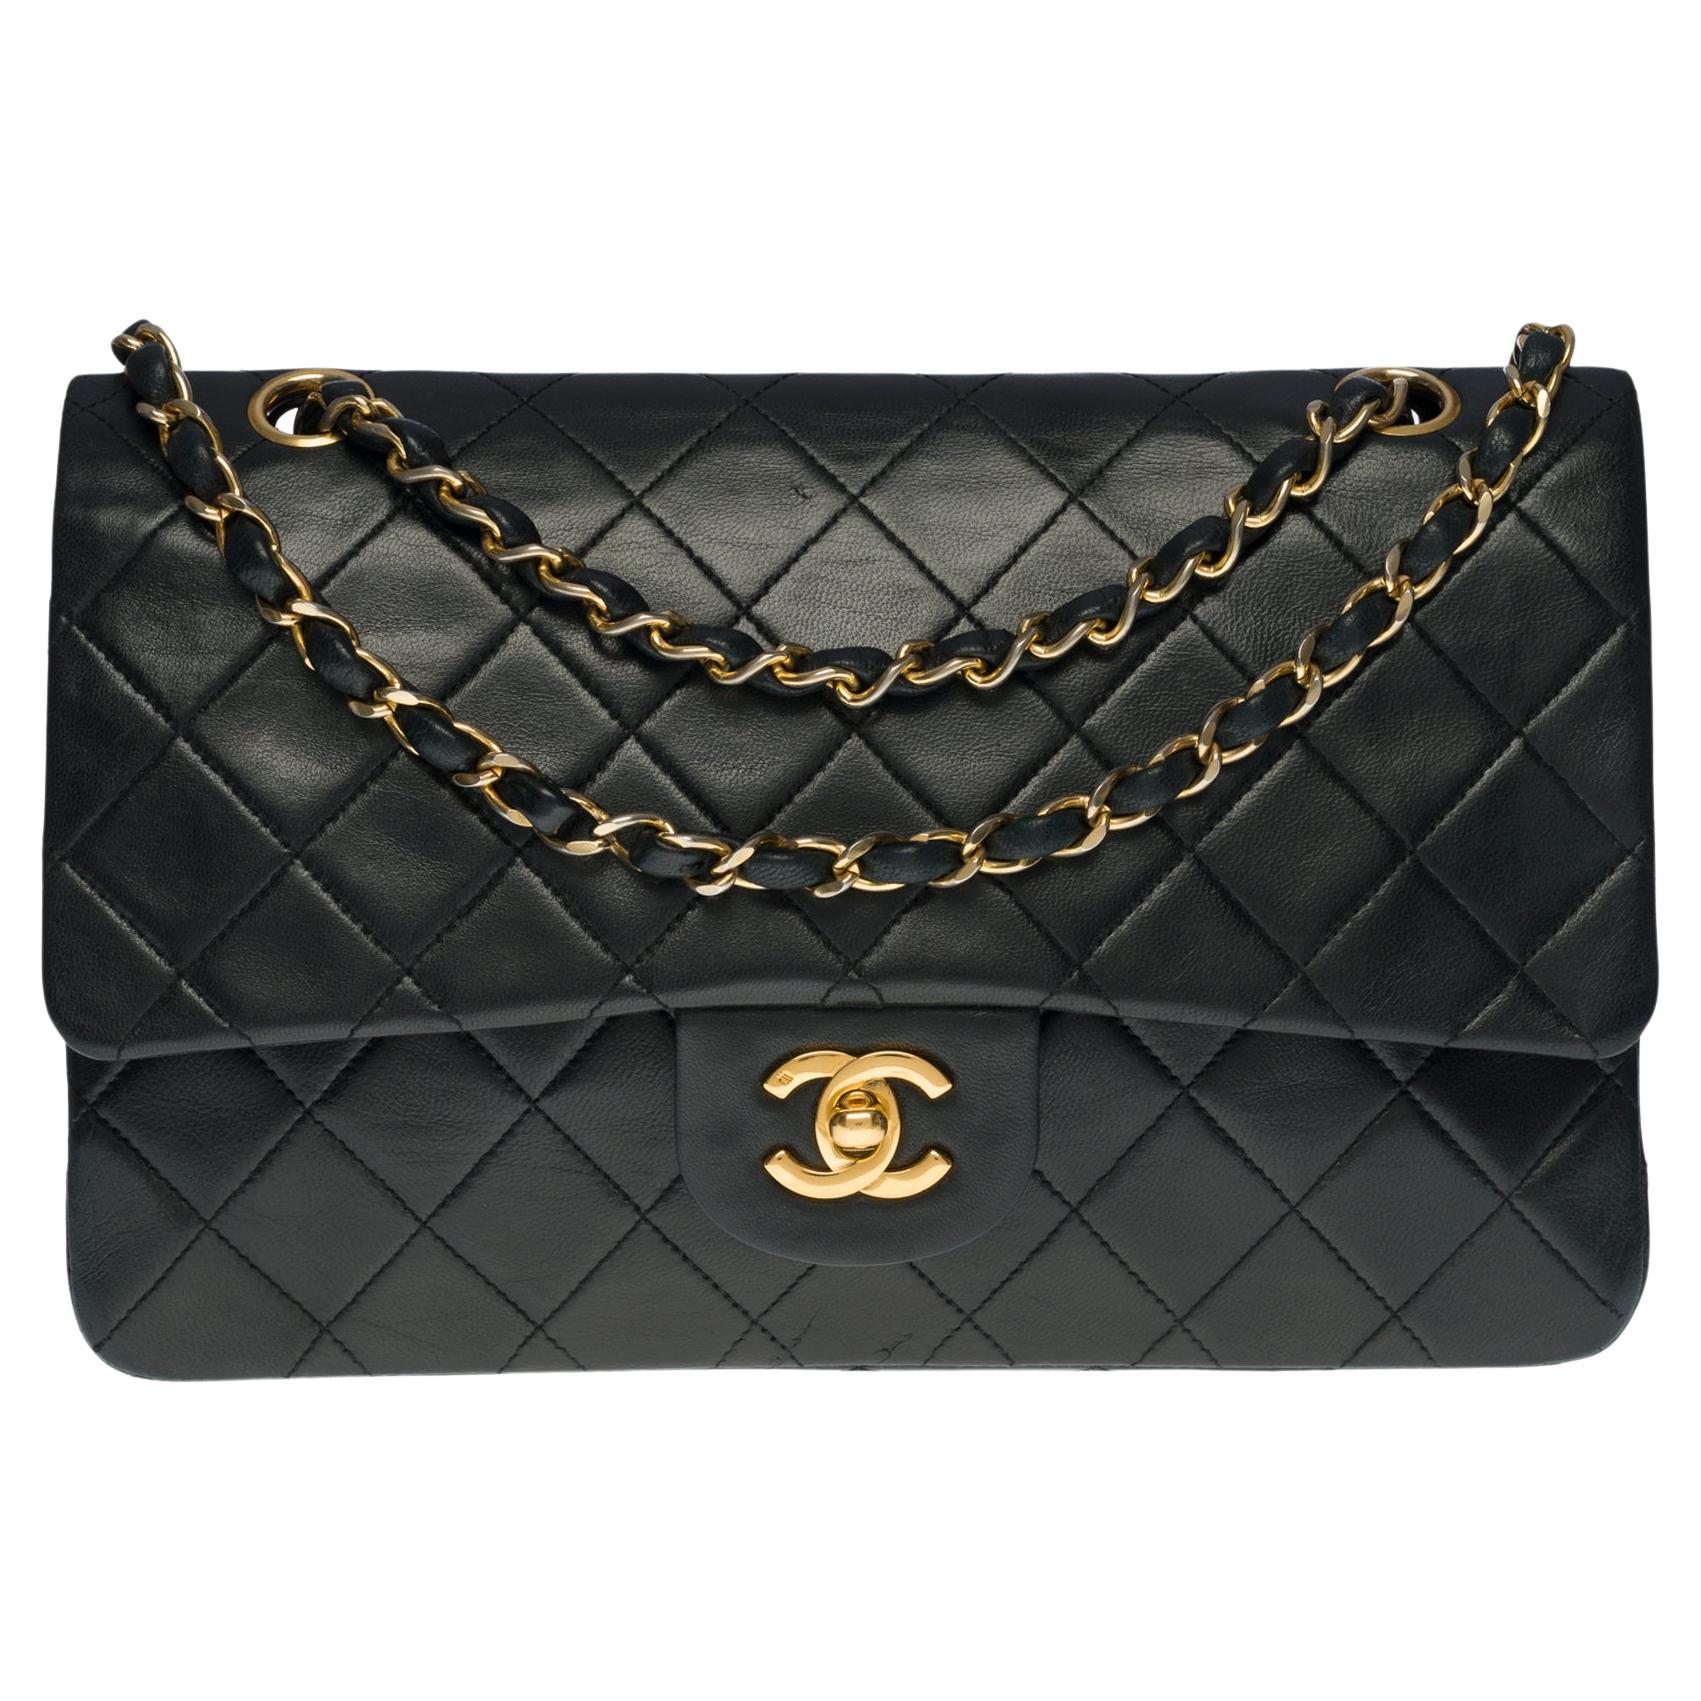 Chanel Timeless Medium Double Flap Shoulder Bag in Black Quilted Lambskin, GHW